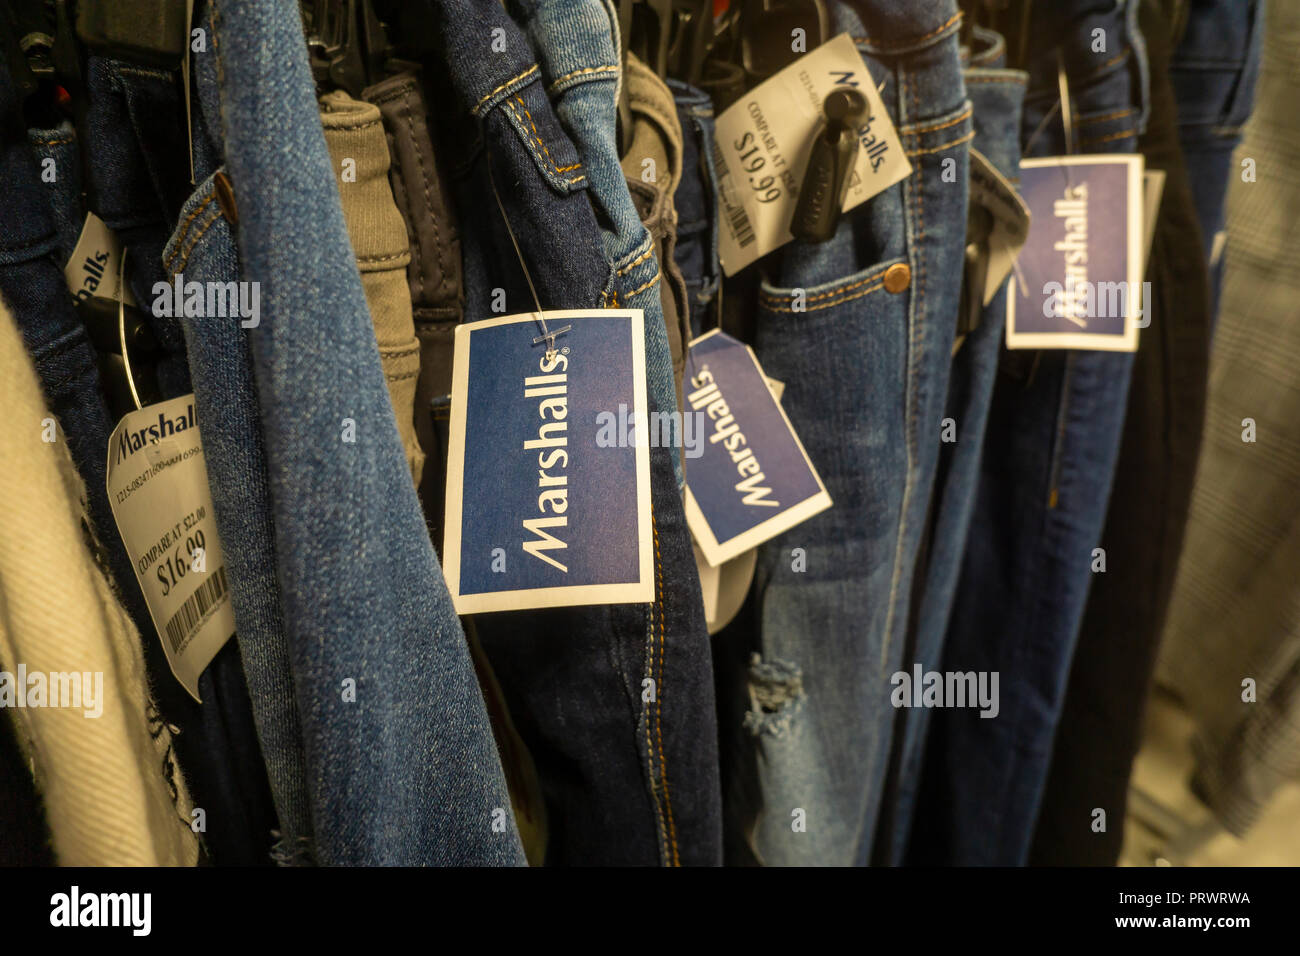 New York, USA. 4th October, 2018. Jeans in the brand new off-price Marshalls store in the Lower East Side neighborhood of in New York during it's grand opening on Thursday, October 4, 2018. Marshalls is a brand of the TJX Companies, parent of Marshalls, T. J. Maxx, HomeGoods and other brands. TJX Companies recently reported comps that grew 6% over year citing increased traffic in its Marmaxx division (Marshalls, TX Maxx). (Â© Richard B. Levine) Credit: Richard Levine/Alamy Live News Stock Photo